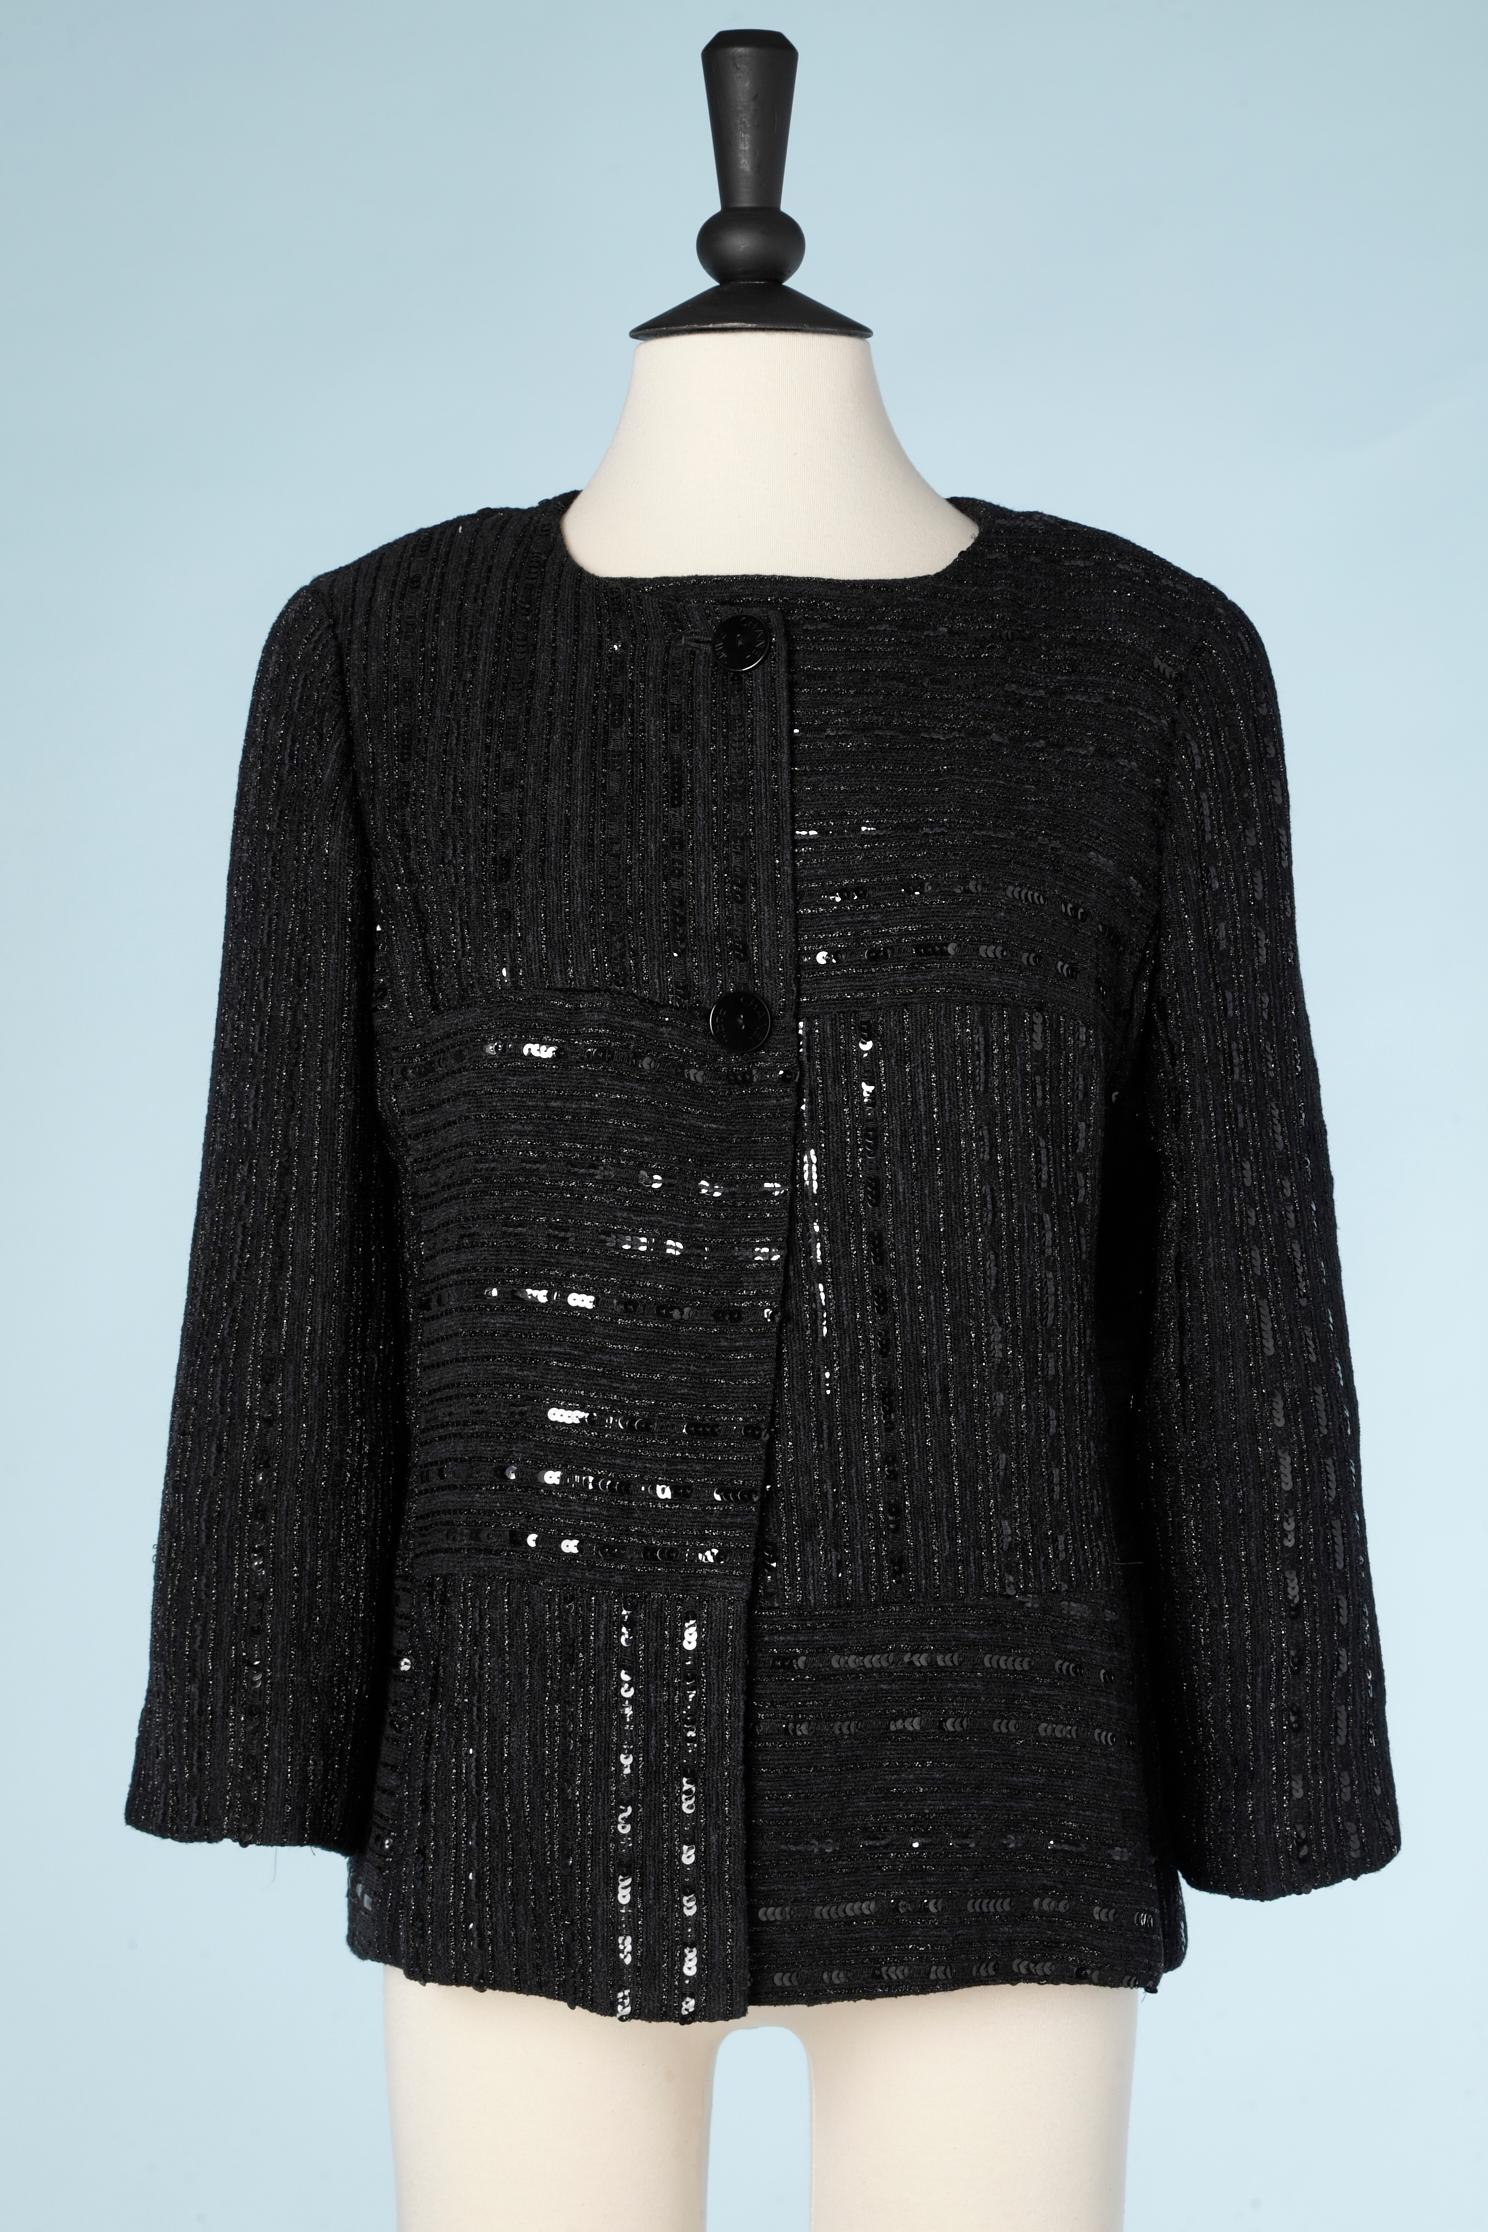 Black jacket and top ensemble in wool, lurex and sequins. Black branded silk lining on both items. Branded buttons. 
SIZE 40 ( M) 